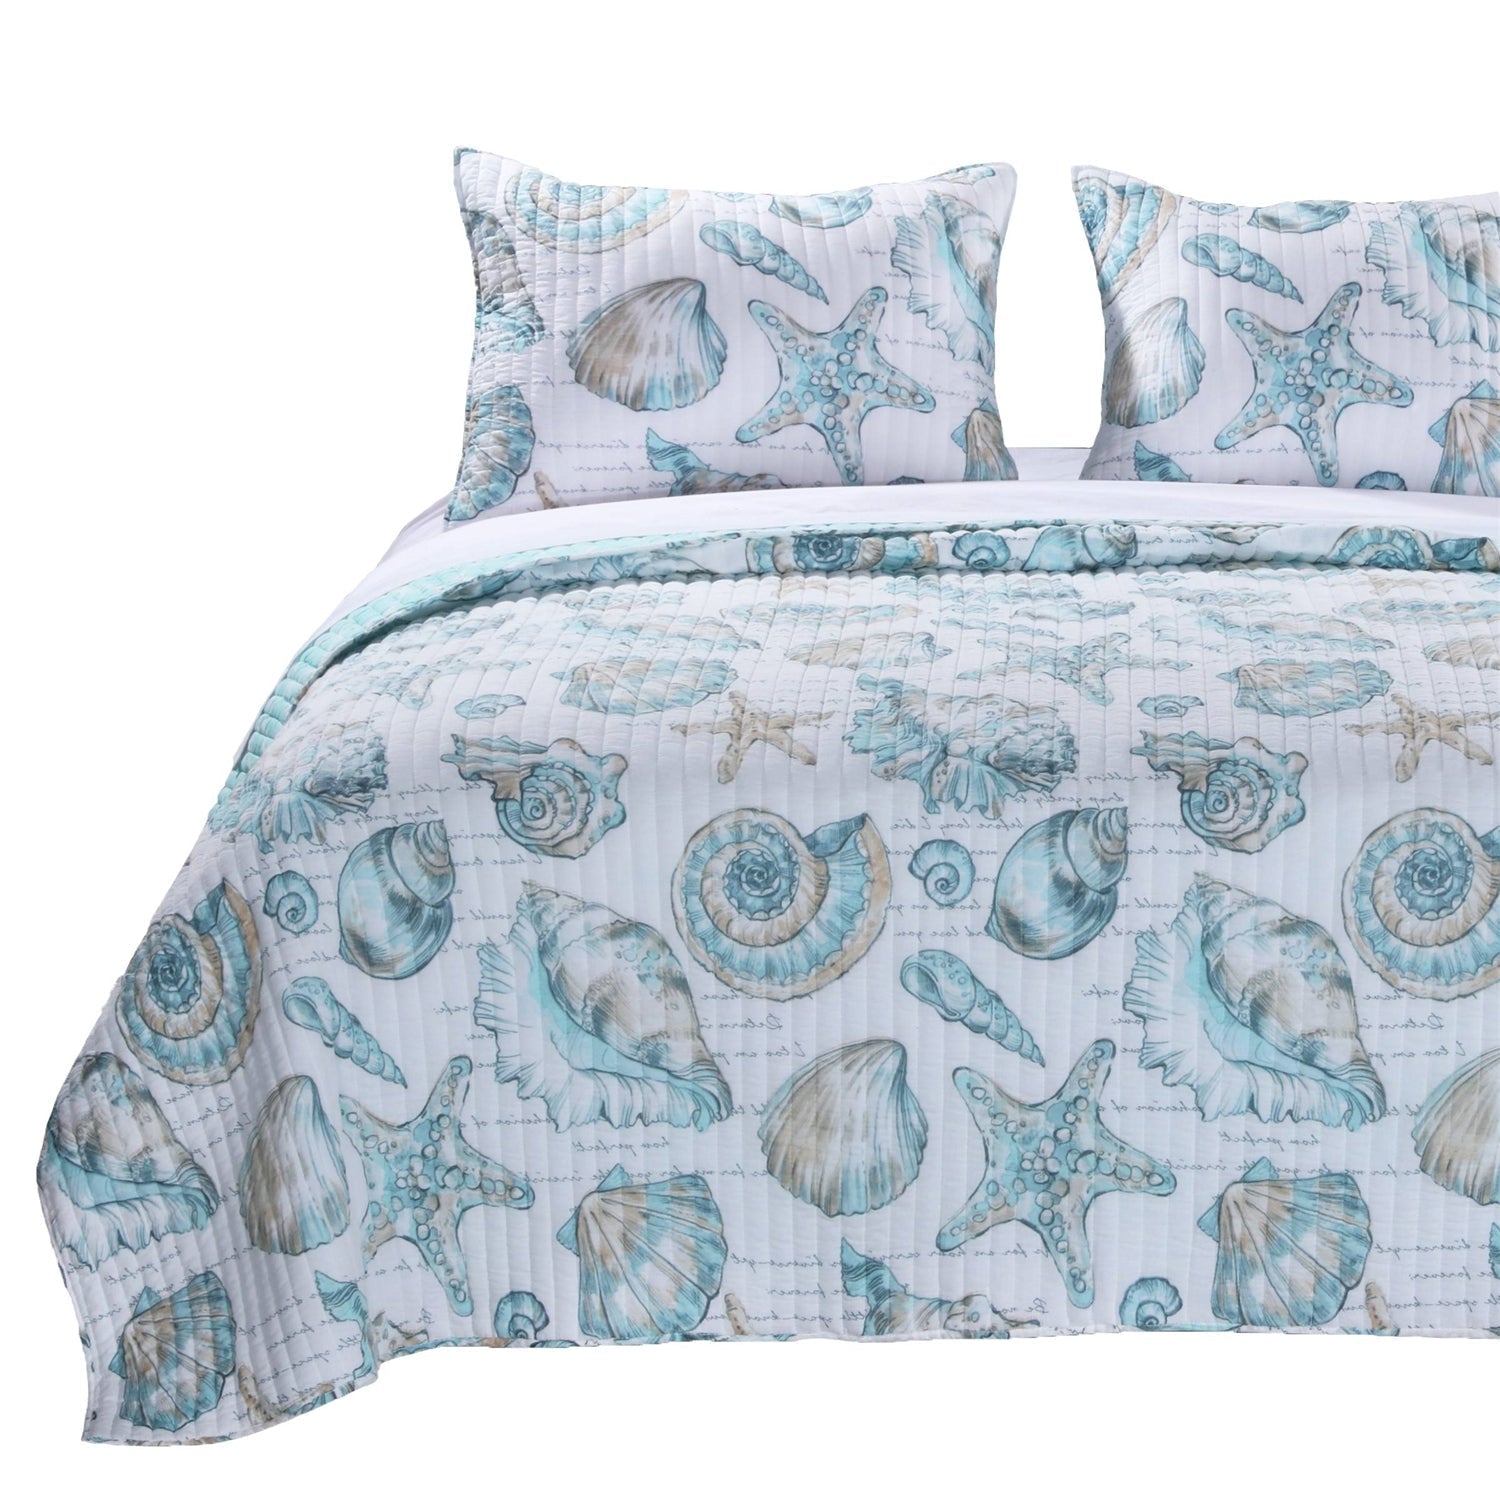 Bedroom > Quilts & Blankets - King Size Coastal Seashells 3 Piece White Teal Polyester Reversible Quilt Set